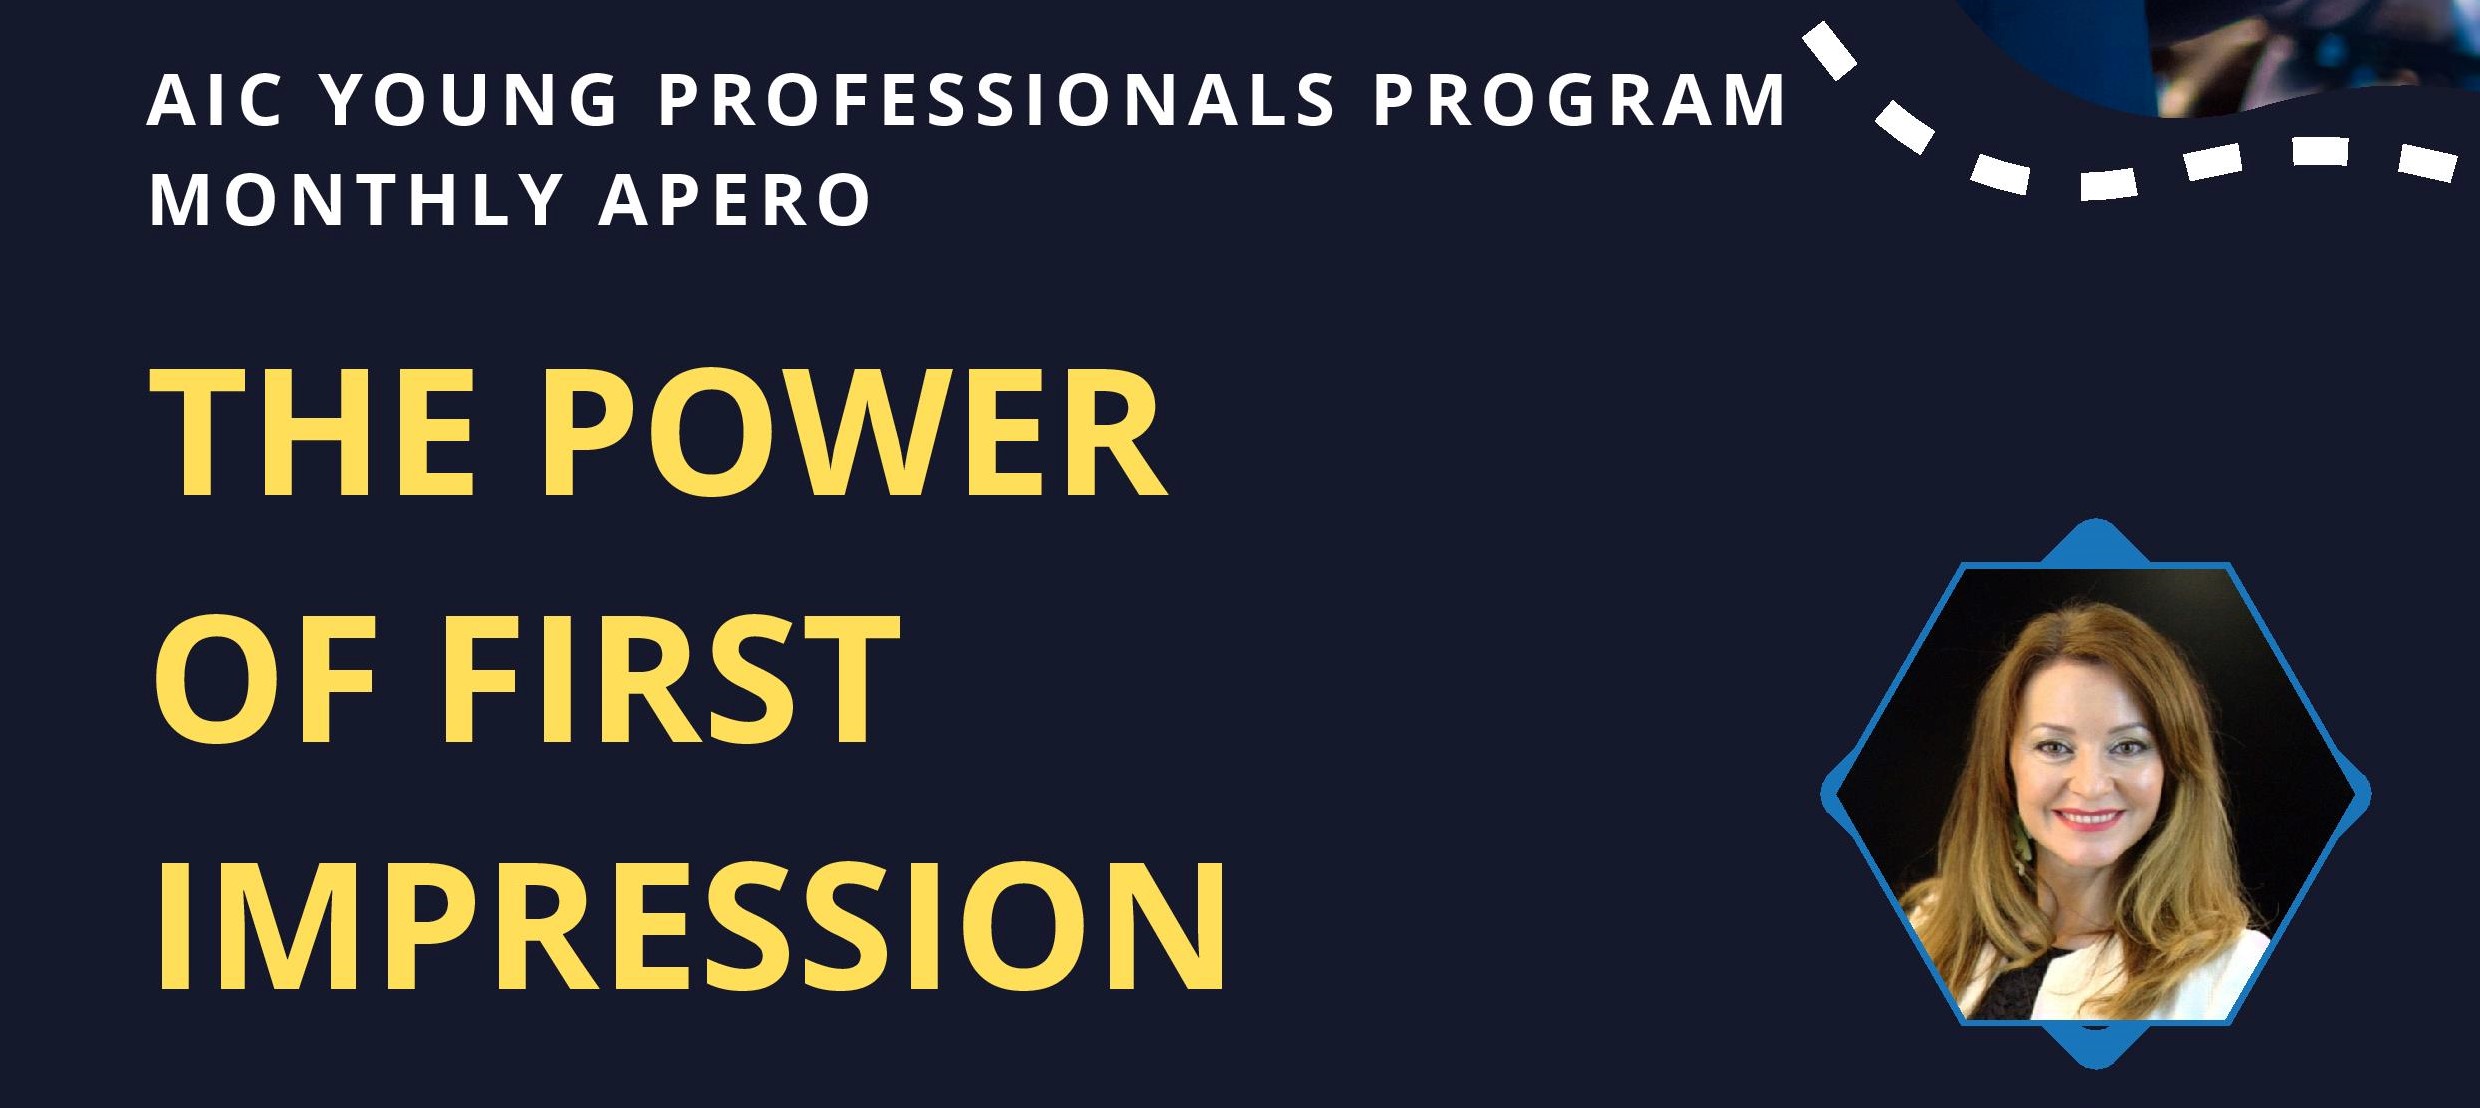 The Young Professionals Program - “The Power of First Impression”